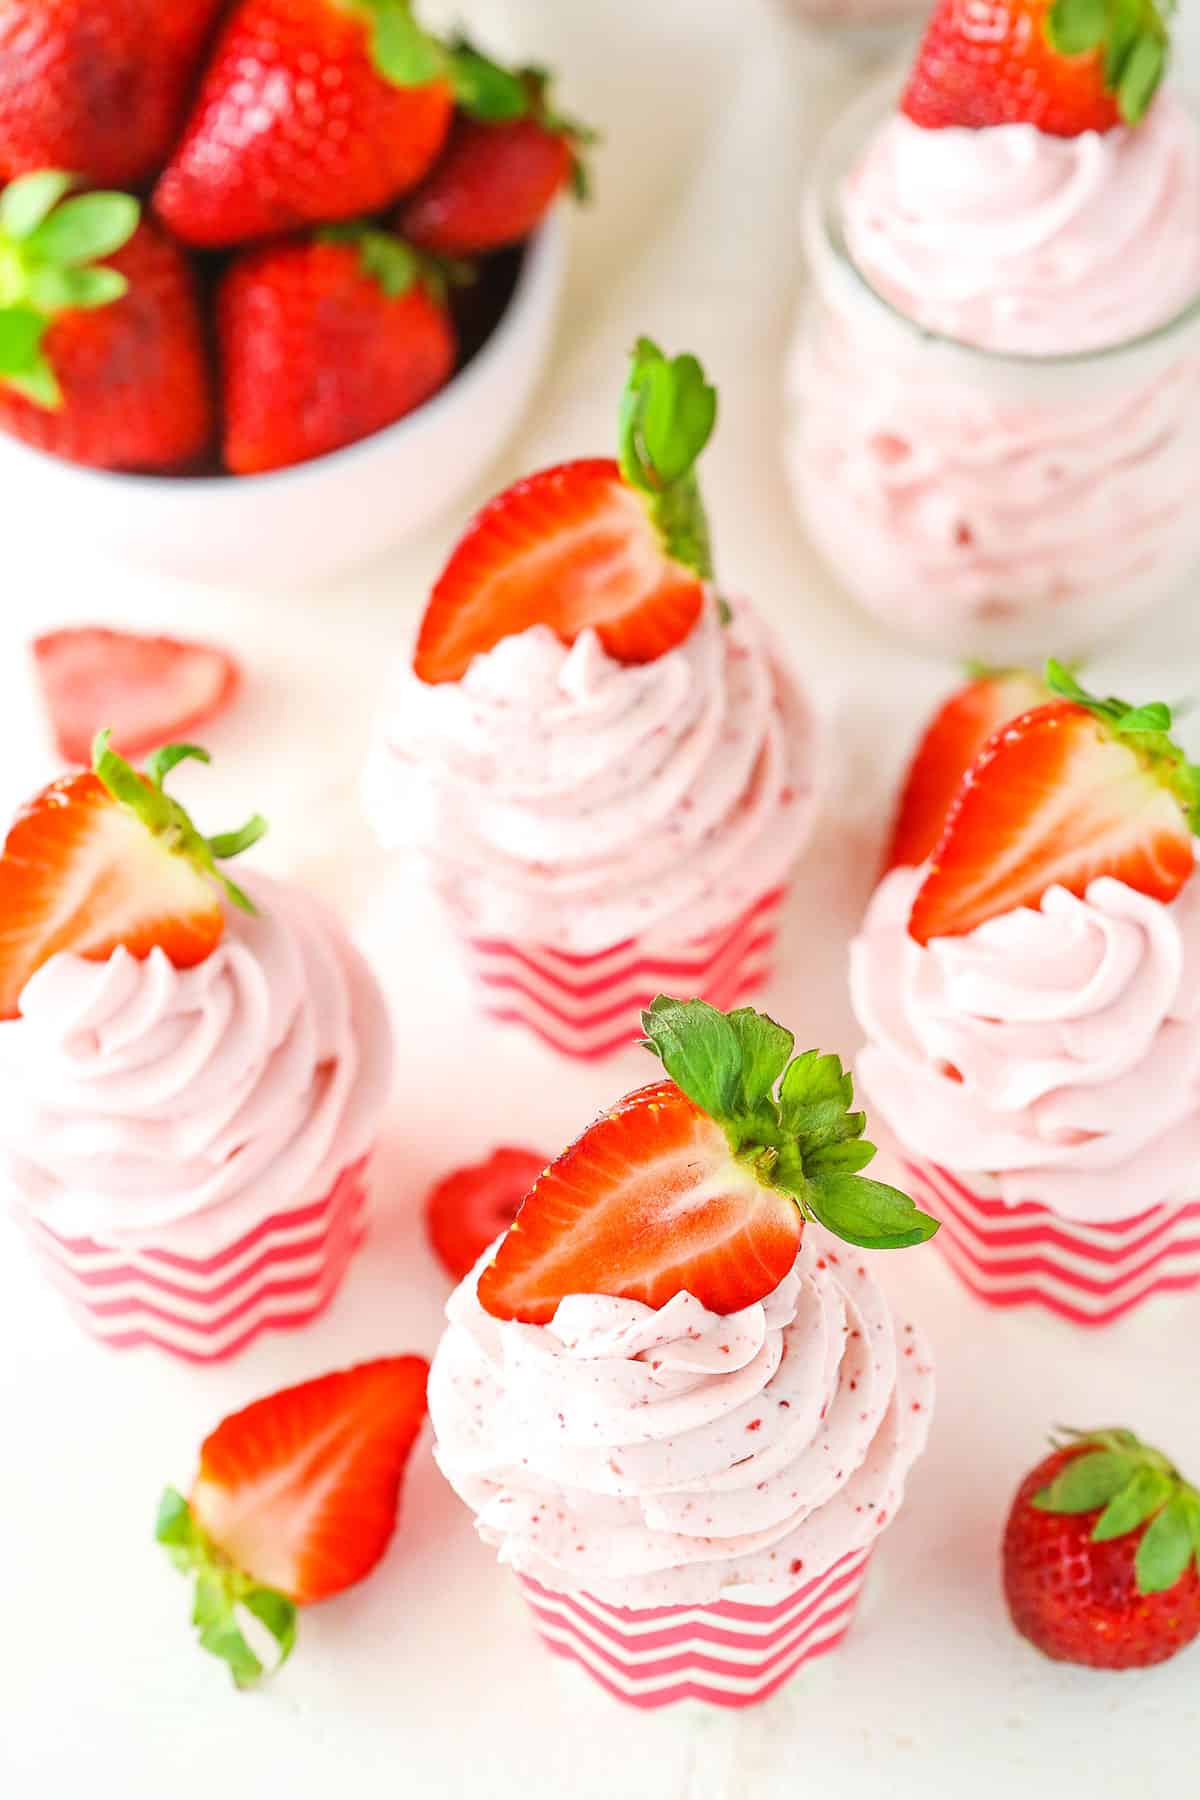 Homemade Strawberry Whipped Cream piped into cupcake wrappers